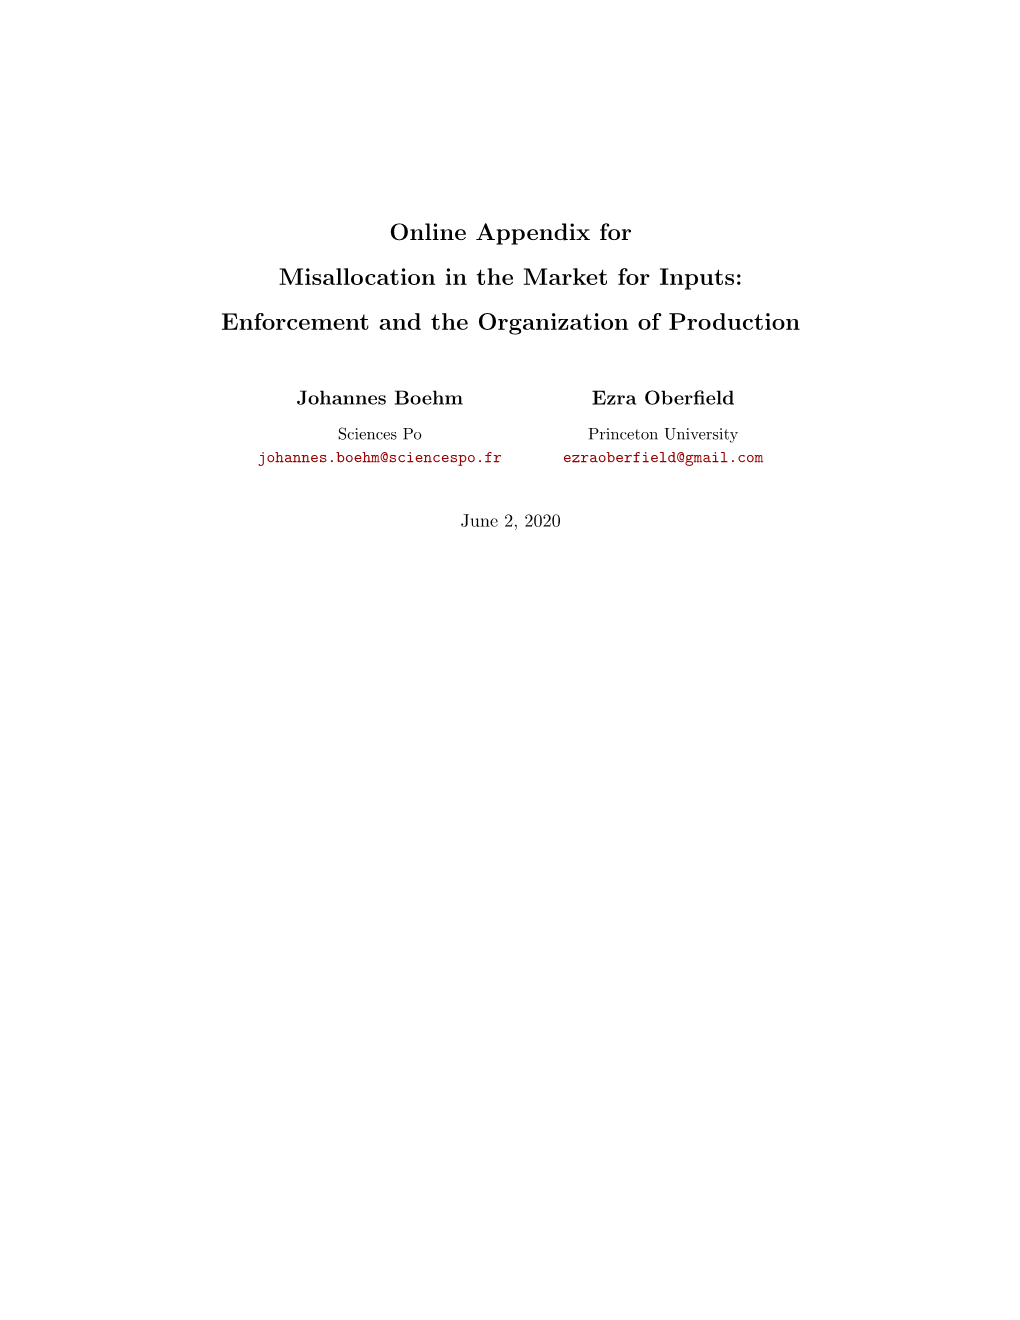 Online Appendix for Misallocation in the Market for Inputs: Enforcement and the Organization of Production